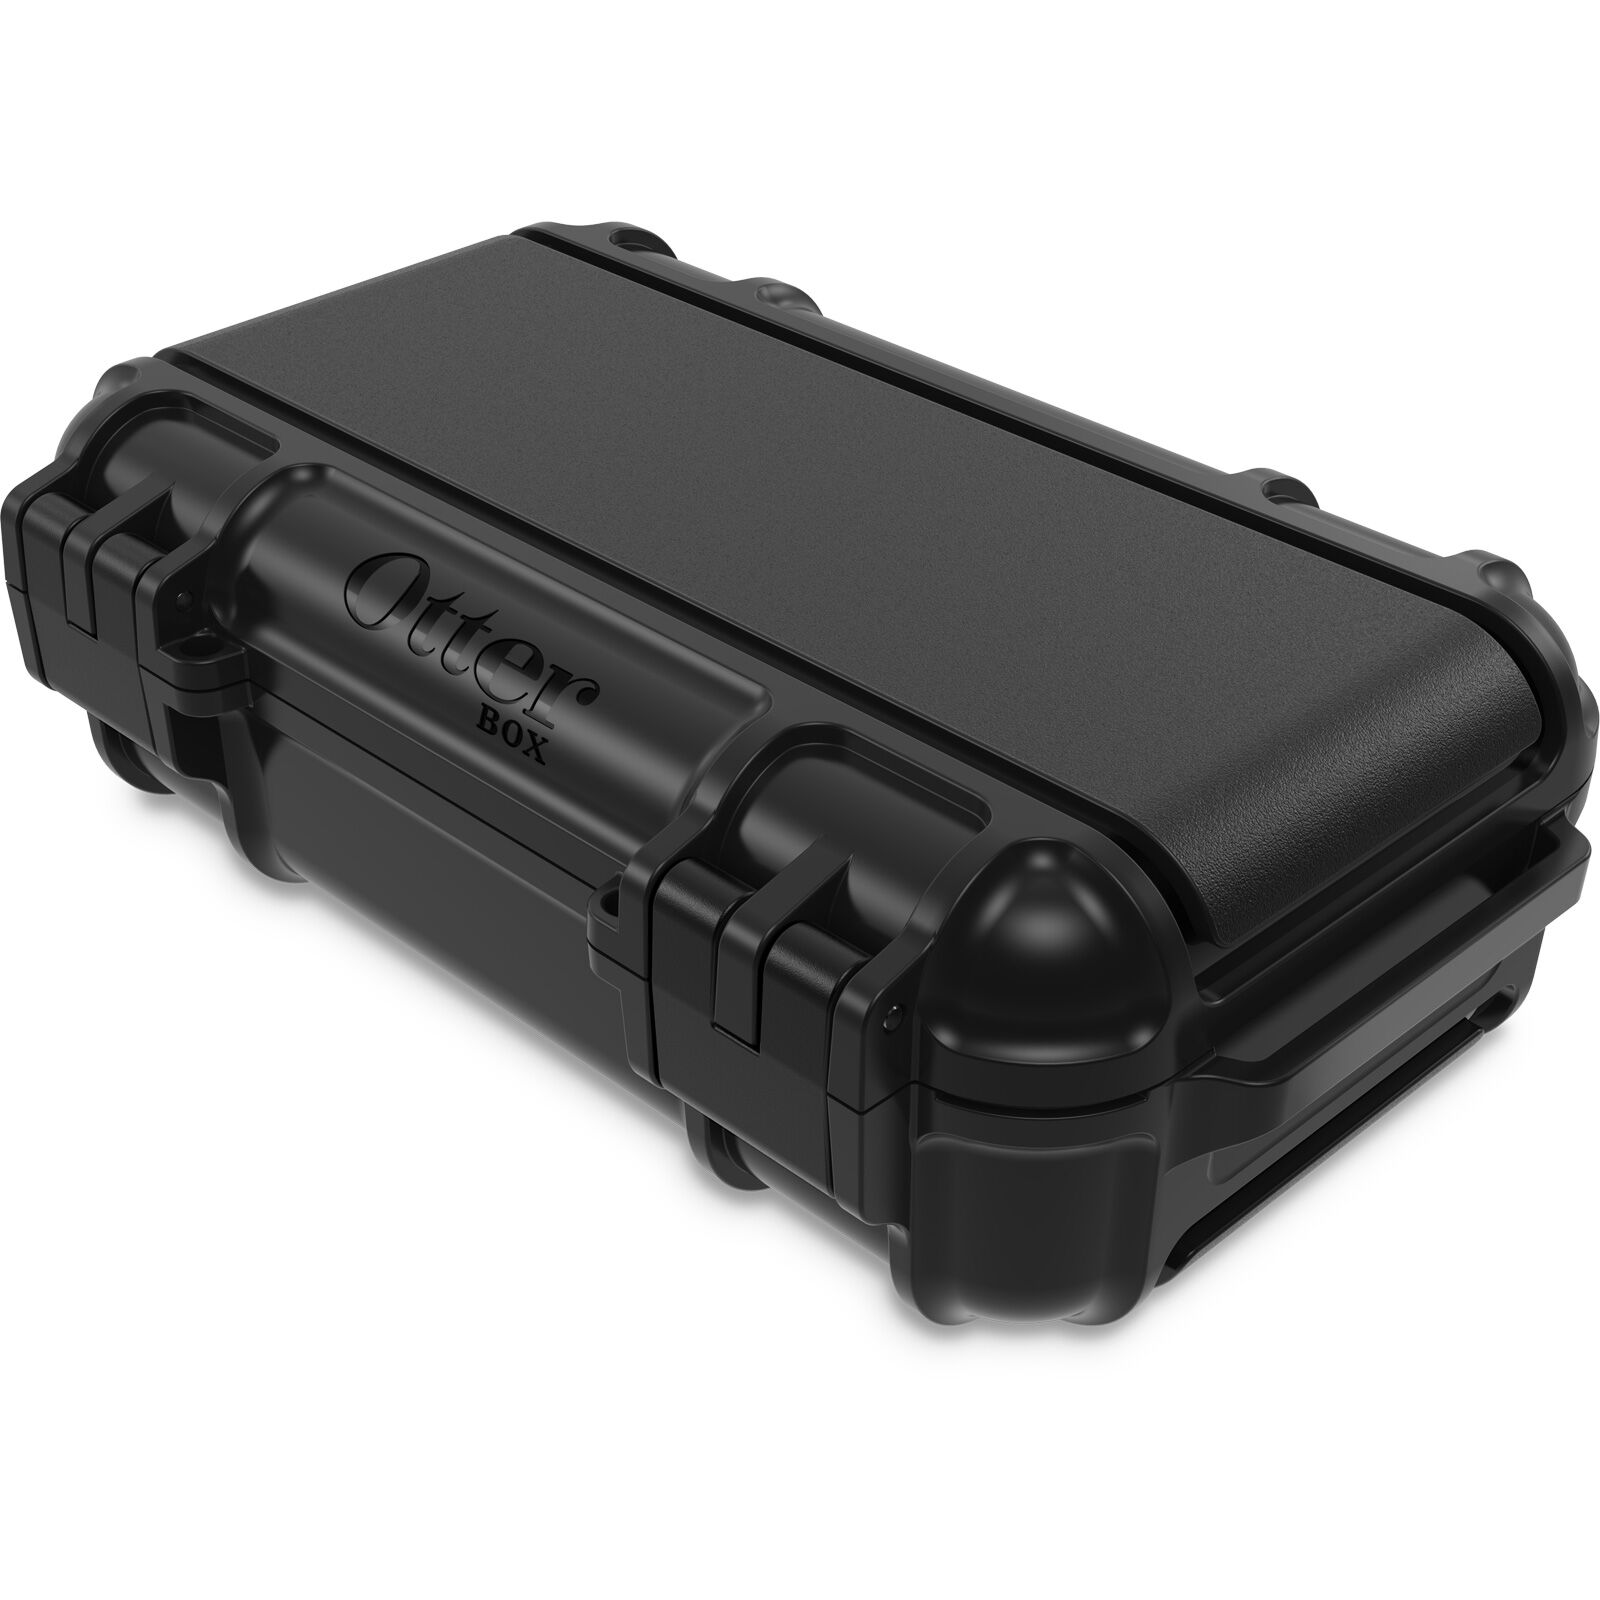 Rugged Drybox 3250 Series from OtterBox